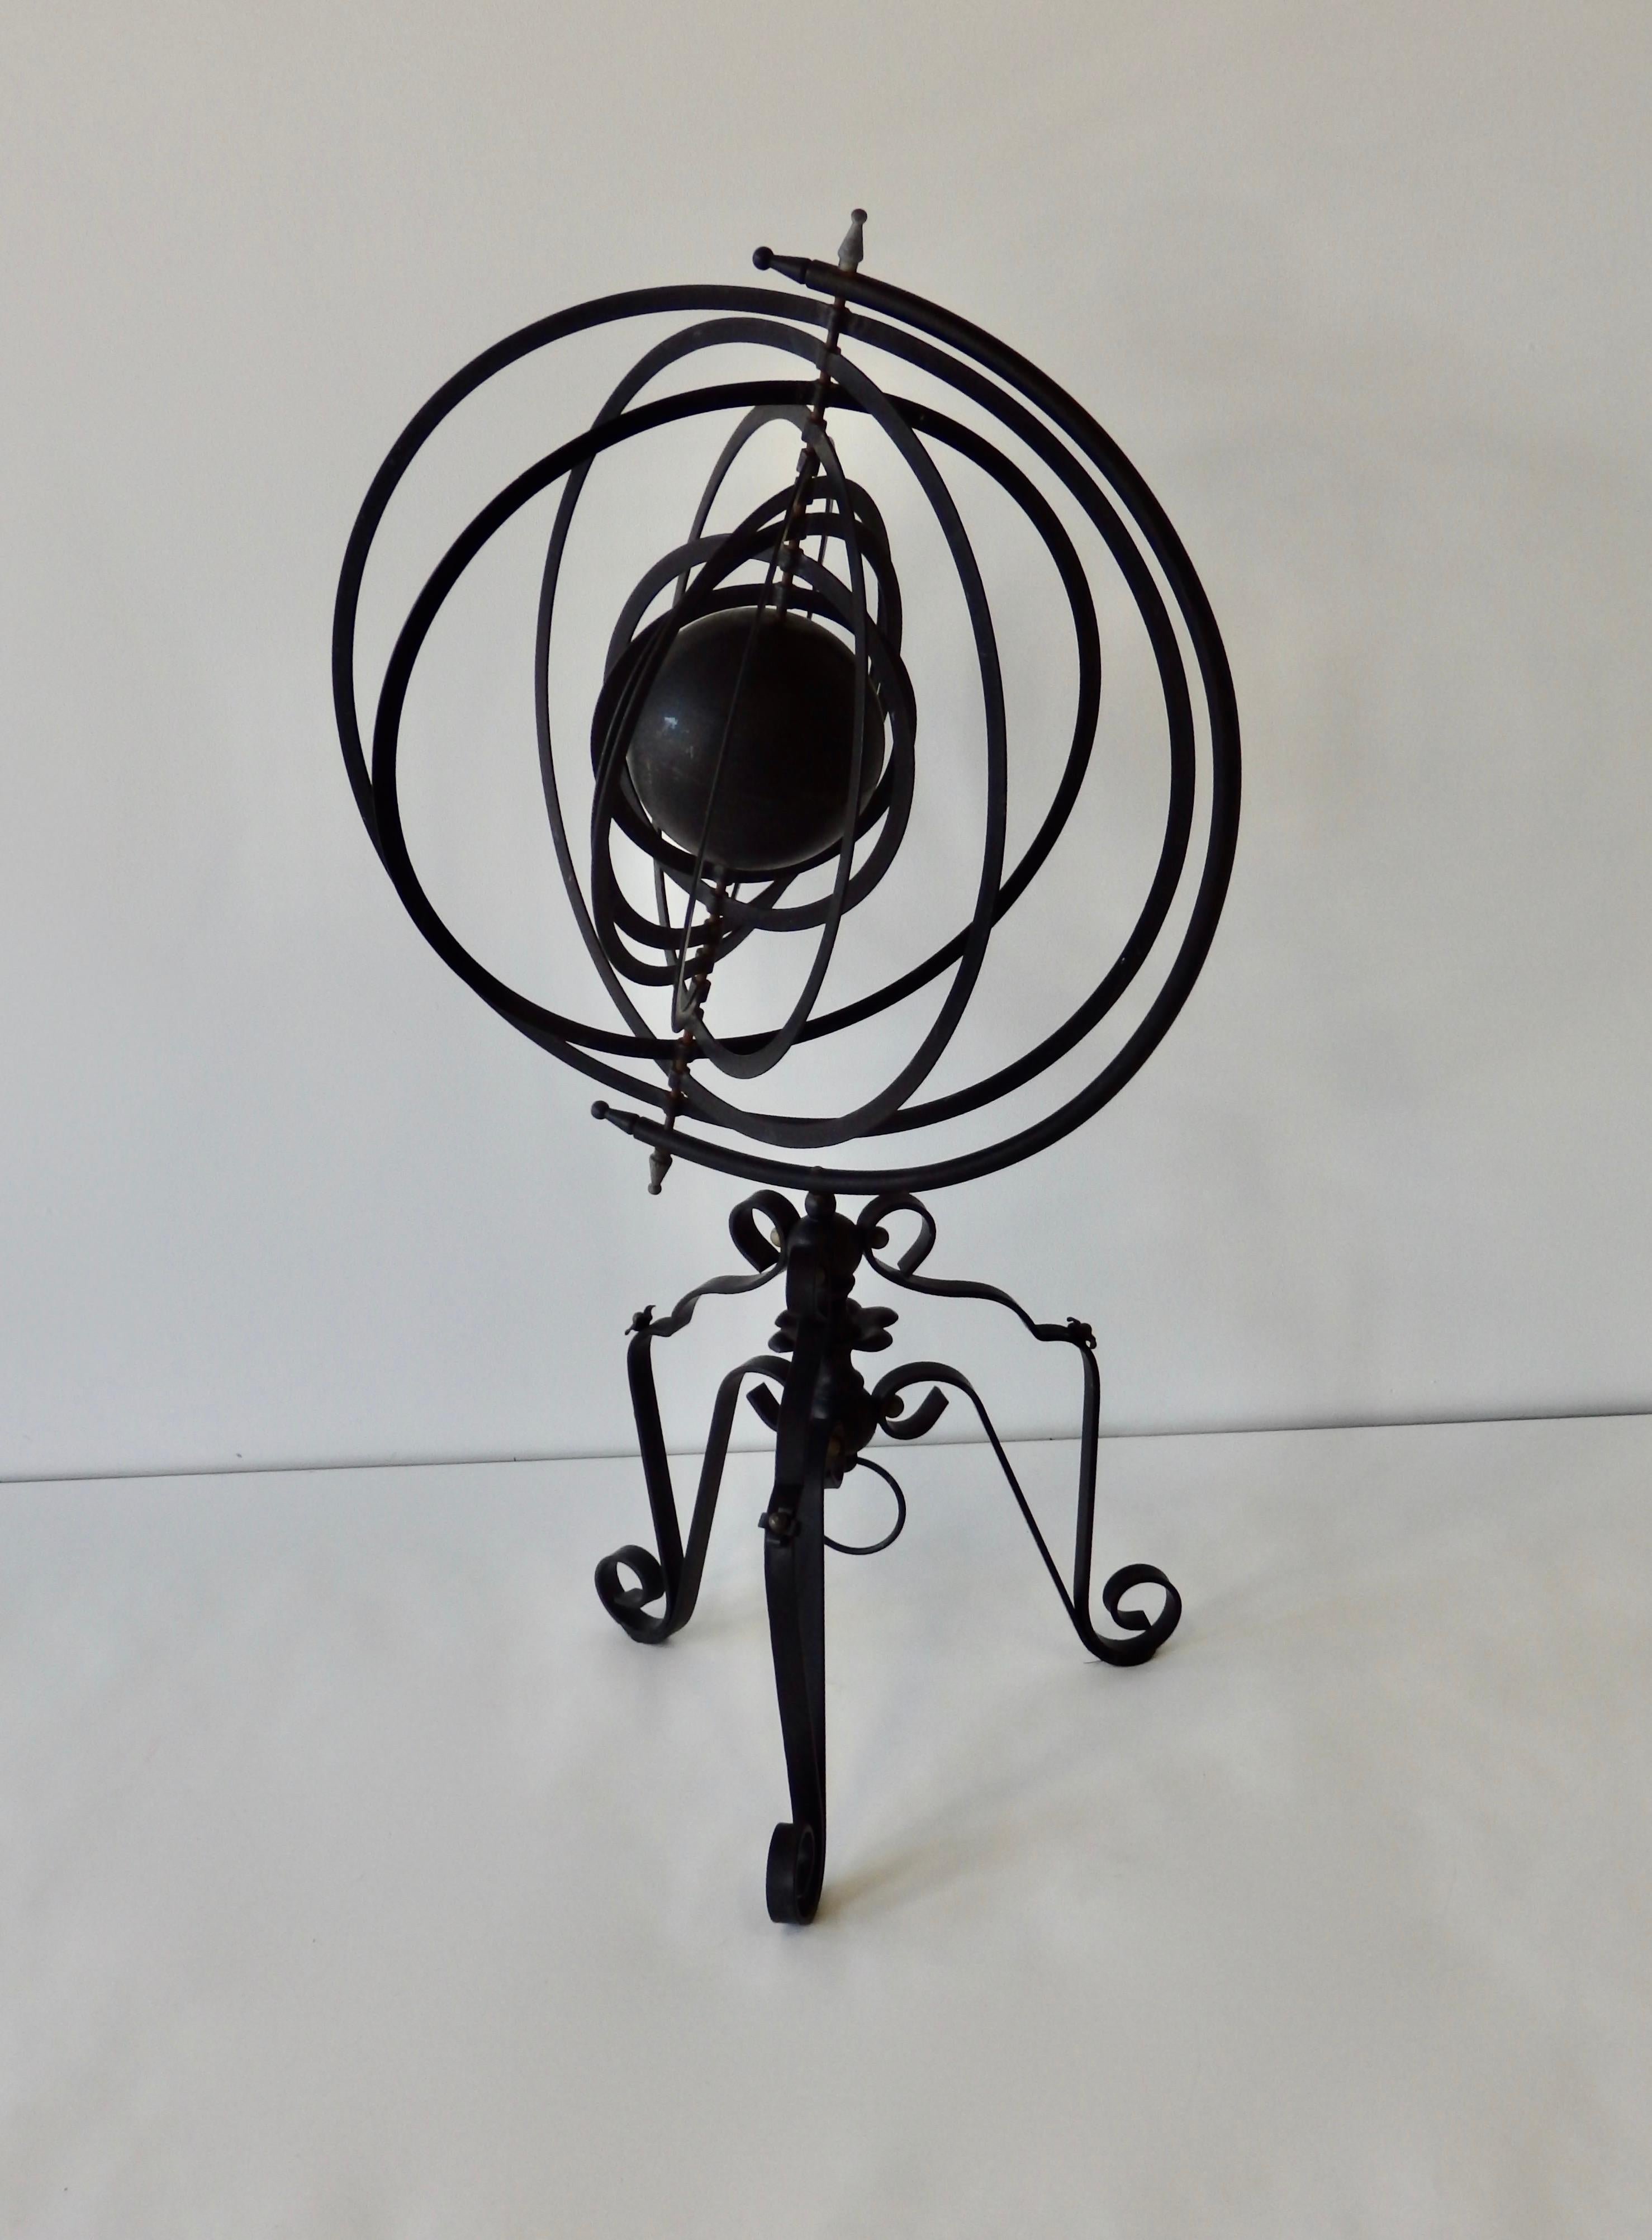 Painted black, this wrought iron armillary is based on the Copernican Heliocentric universe with nine outer spheres in rotation around a central sun.
Diameter of rings is 21.5', 39.5